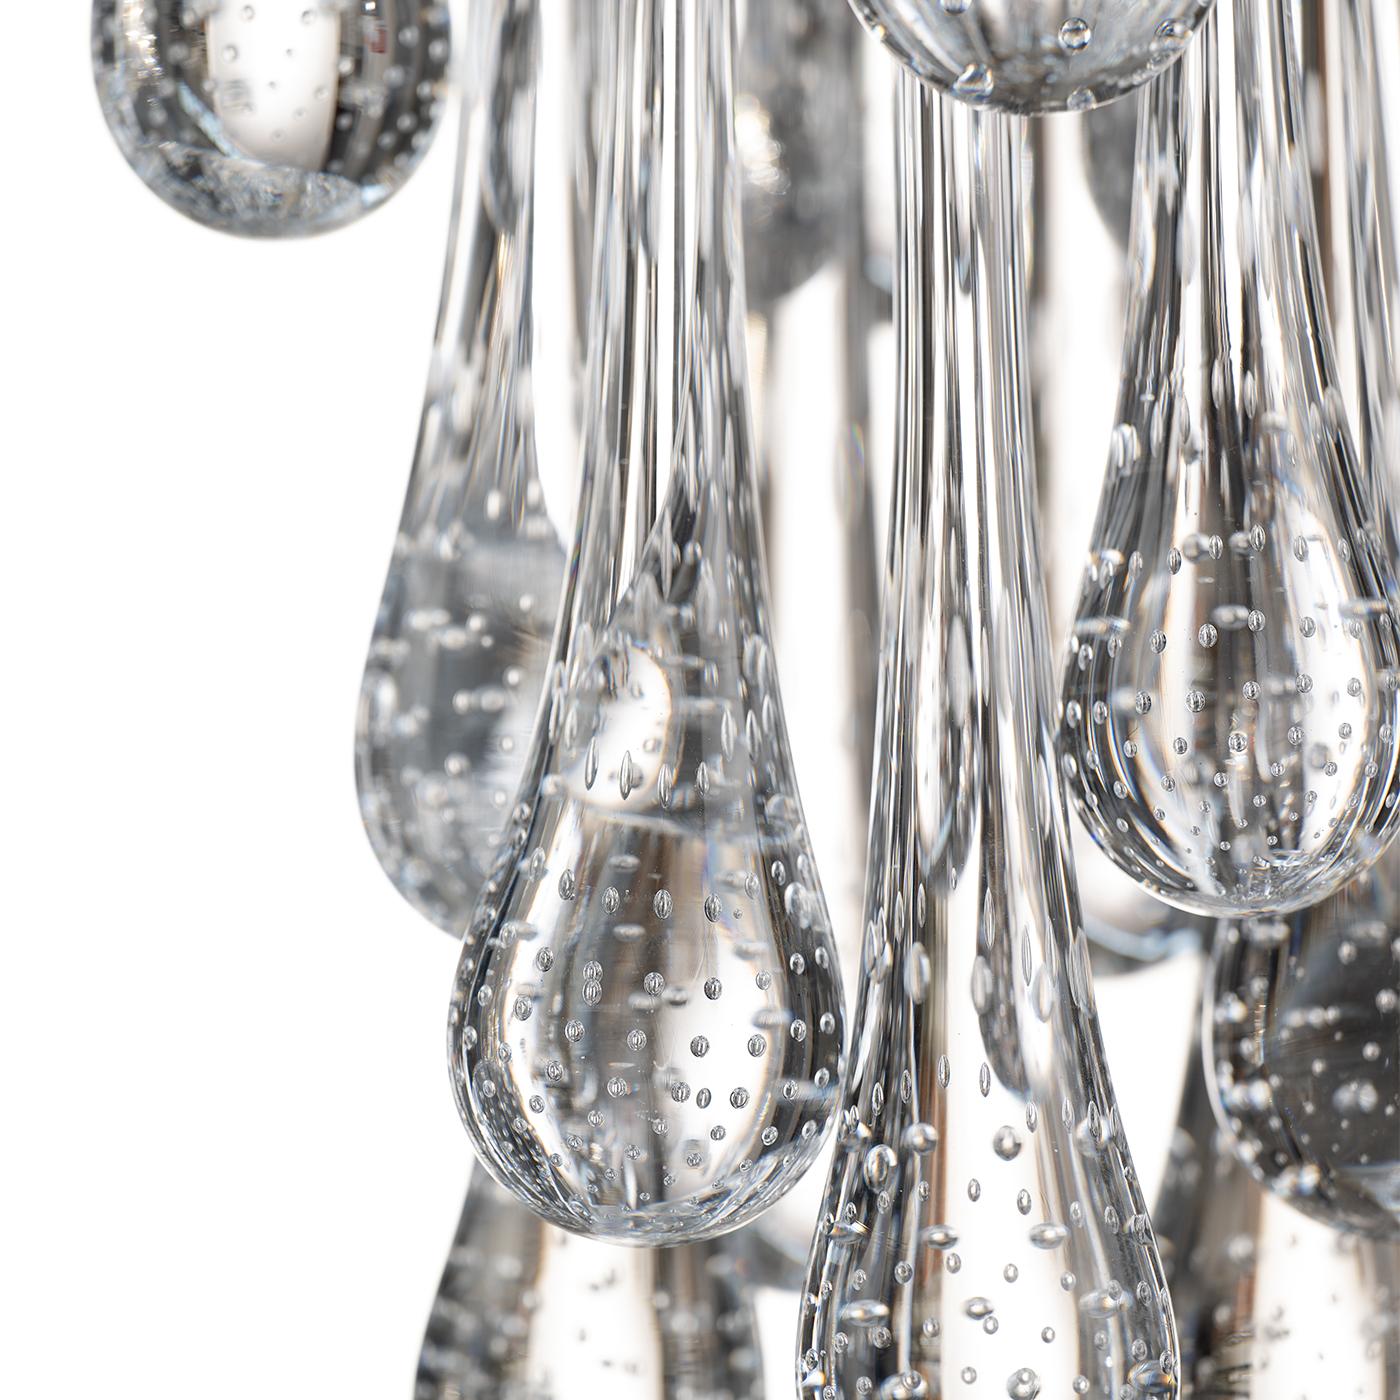 Poetically inspired by dew drops, this precious Murano glass sconce recalls dewy lanes just before daybreak. A glaring golden-finished metal frame sustains three tiers of drop-shaped transparent glass crystals that flaunt tiny air bubbles trapped